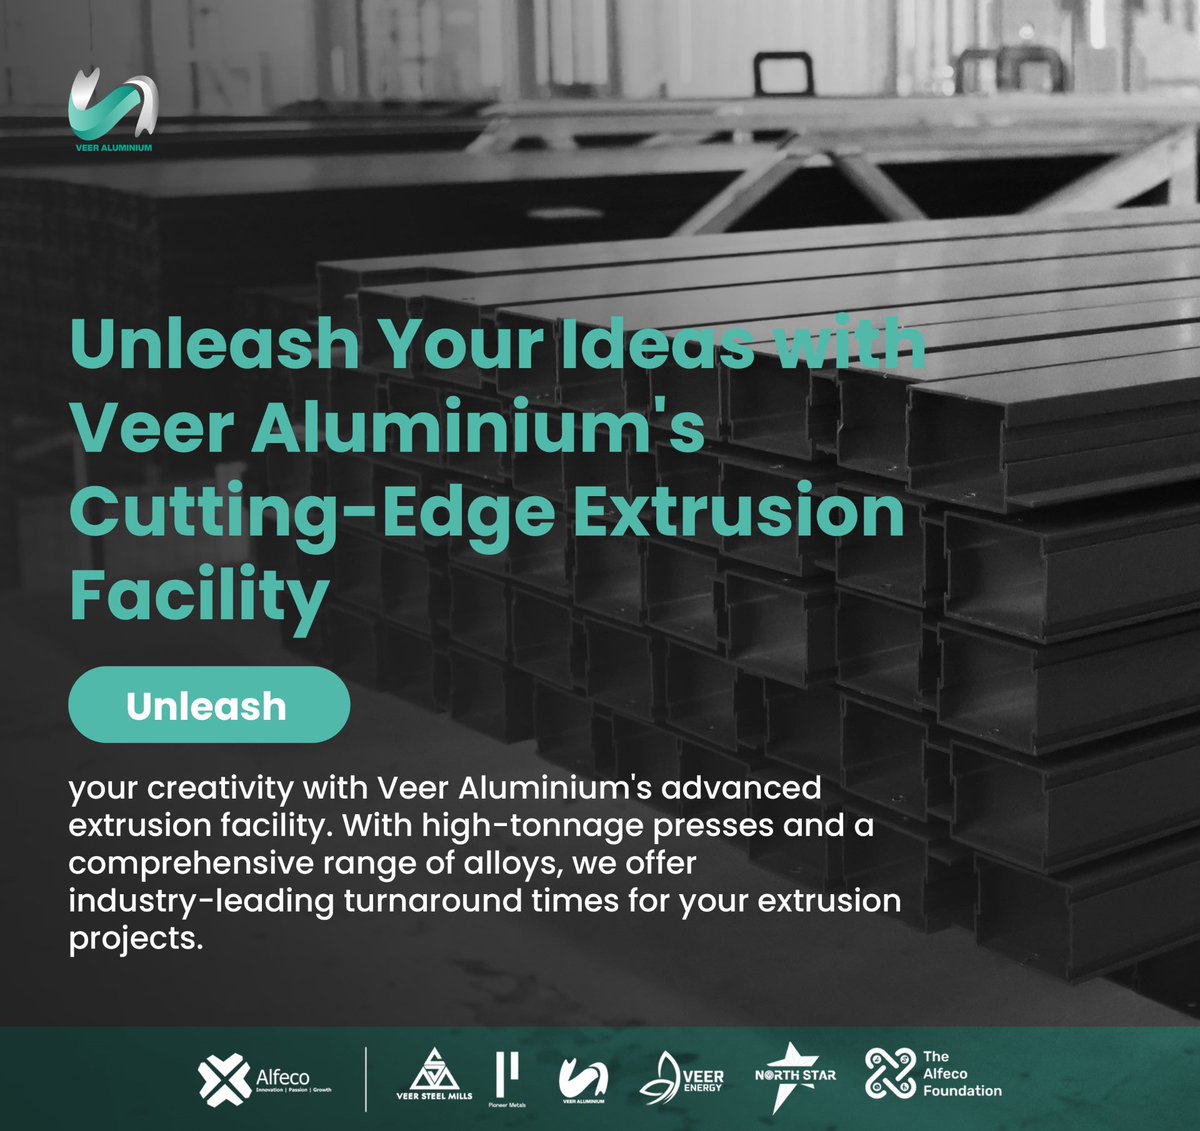 From standard profiles to complex designs, our facility is equipped to bring your ideas to life with precision and speed. #CuttingEdgeExtrusion #VeerAluminium #PrecisionAndSpeed #AlfecoGroup #PioneerMetals #VeerSteelMills #VeerEnergy #AlfecoFoundation #vanorthstar